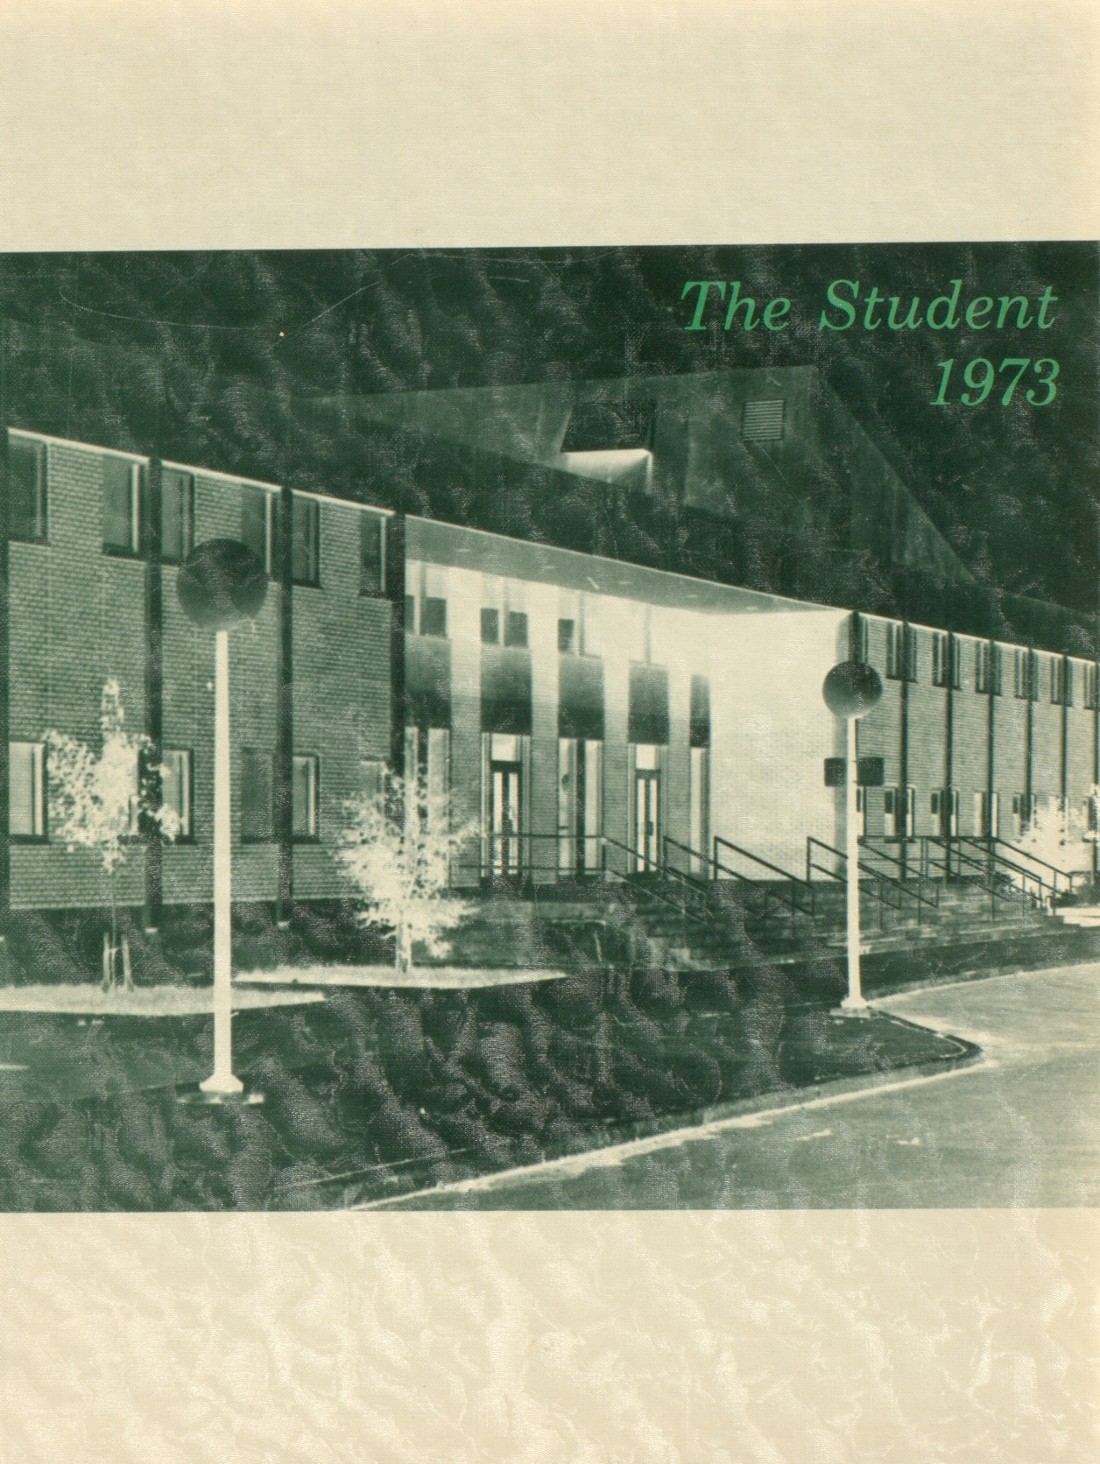 1973 yearbook from Franklin Academy from Malone, New York